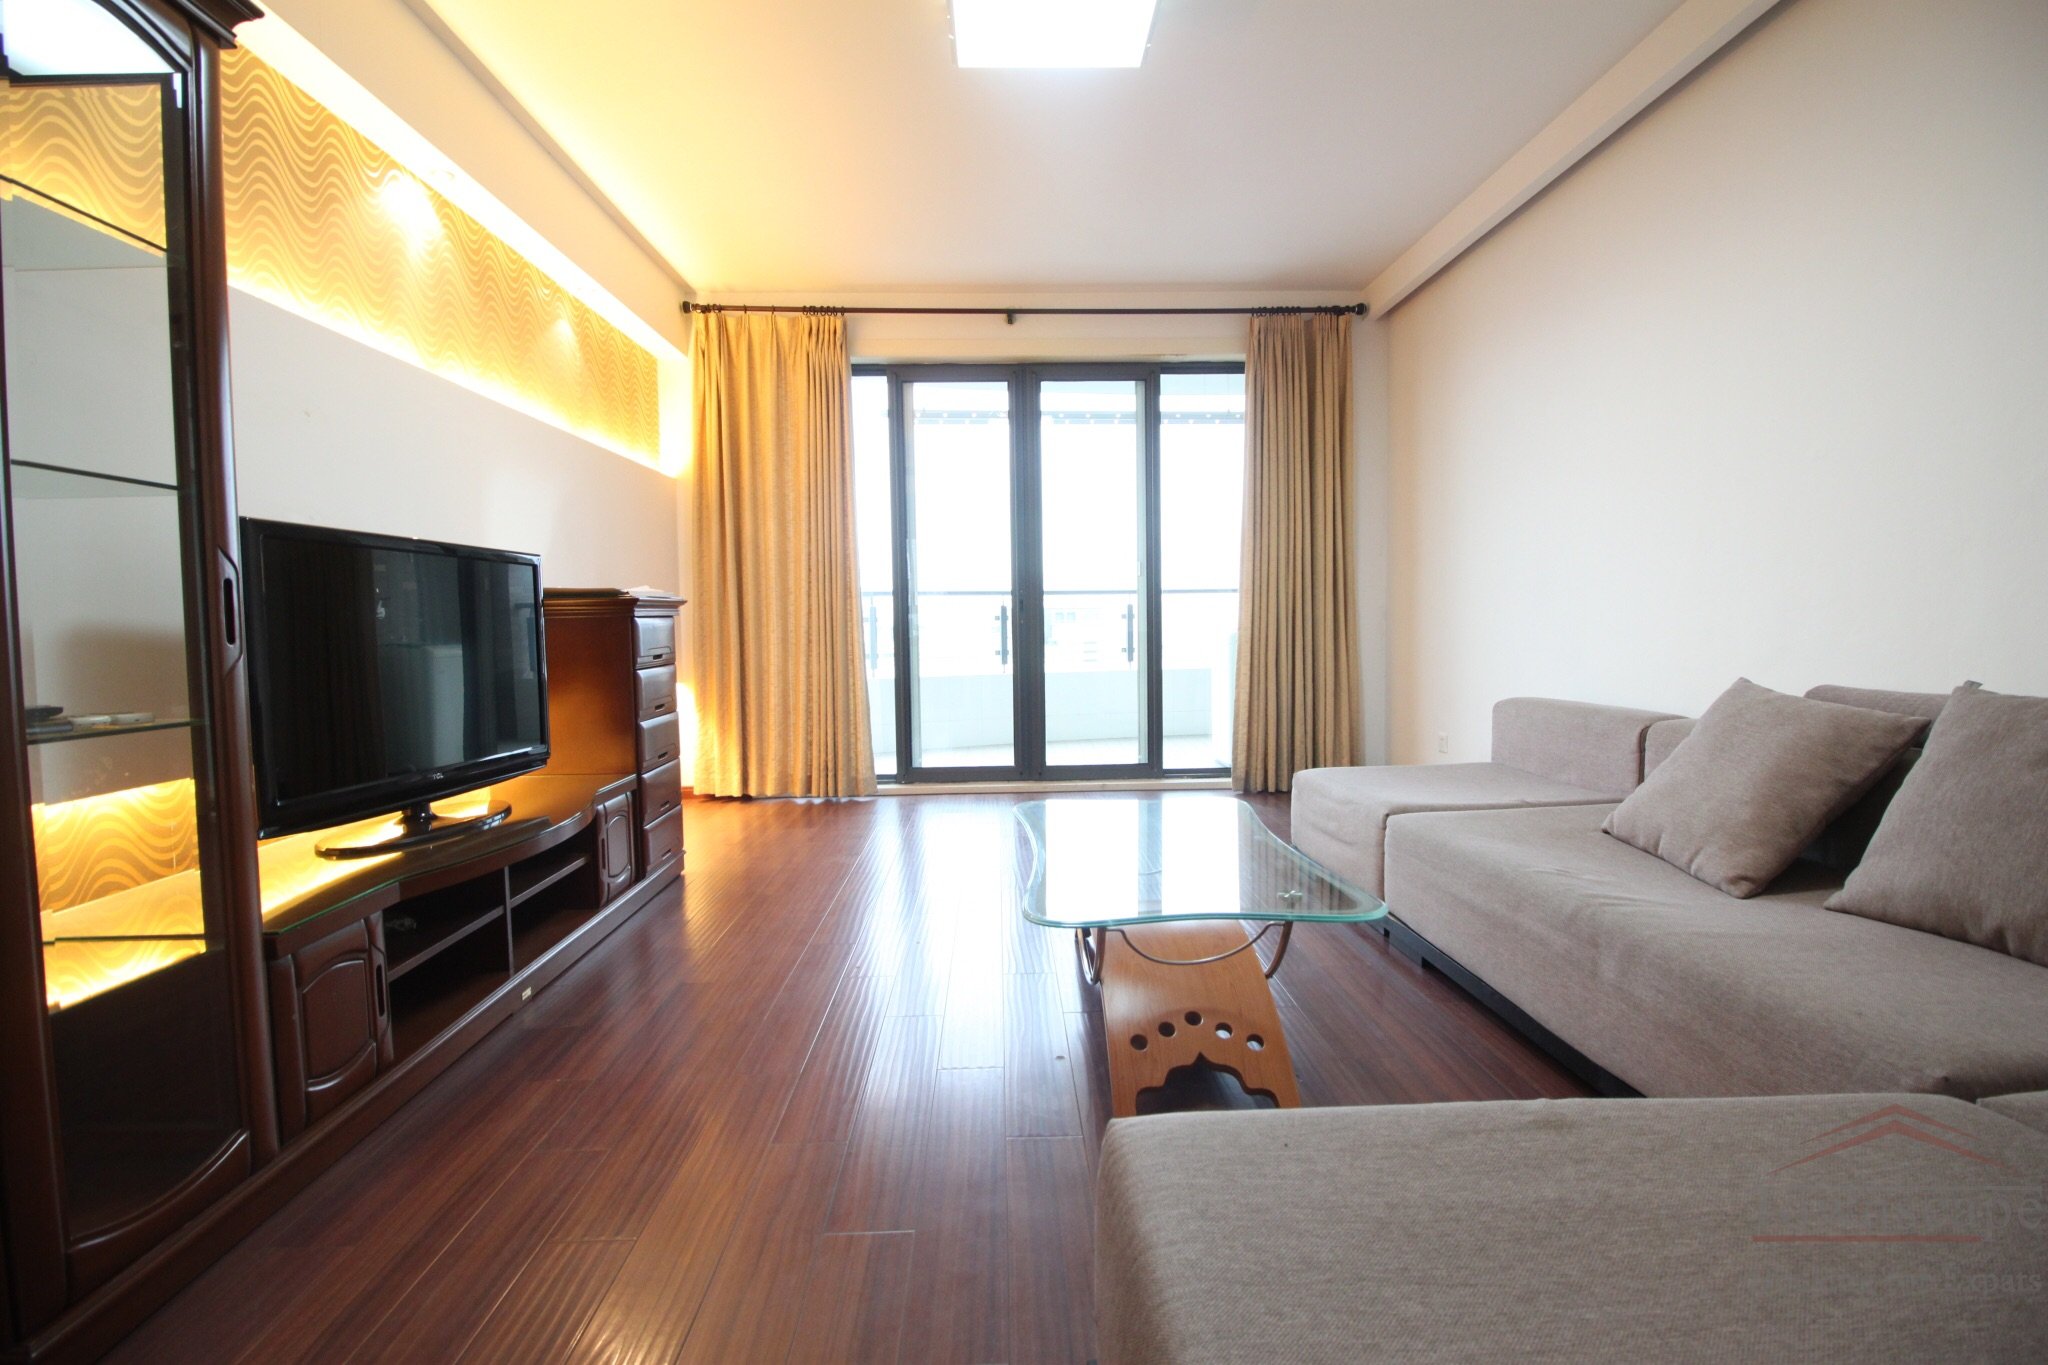 Shanghai apartment for rent Sunny 3BR Apartment for rent in East Lujiazui, next to Metro station Minsheng Road, Line 6